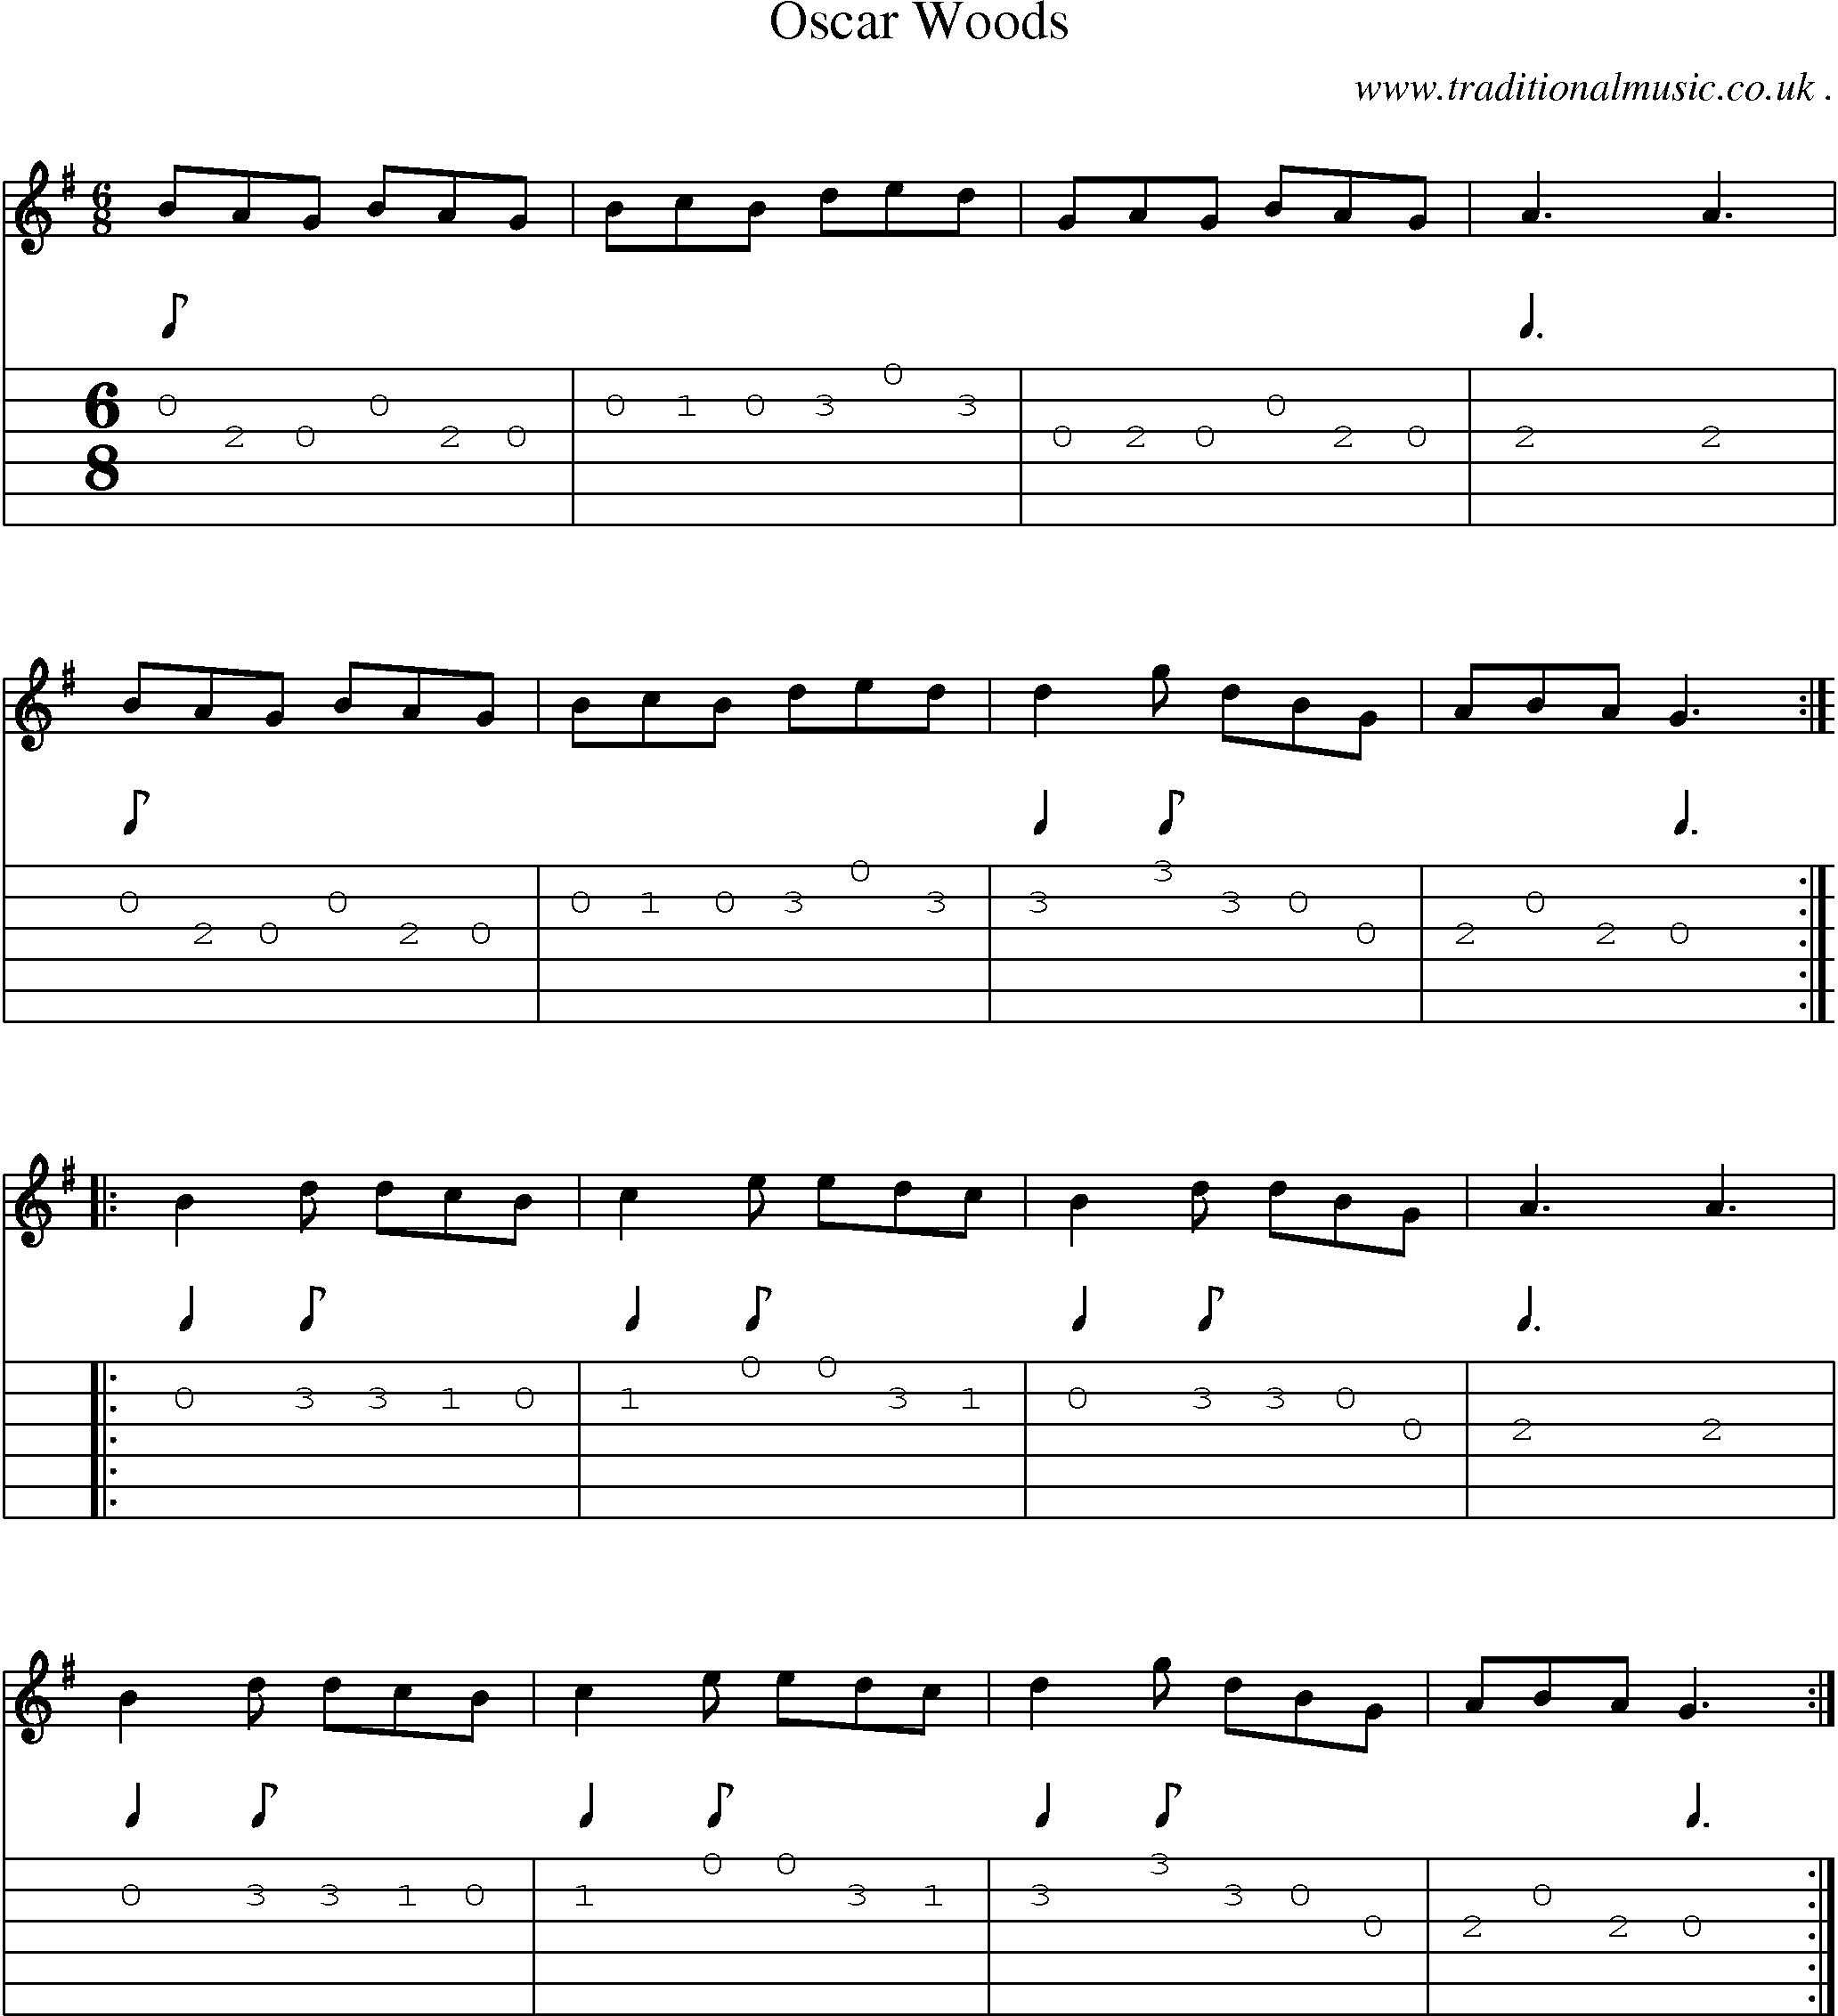 Sheet-Music and Guitar Tabs for Oscar Woods